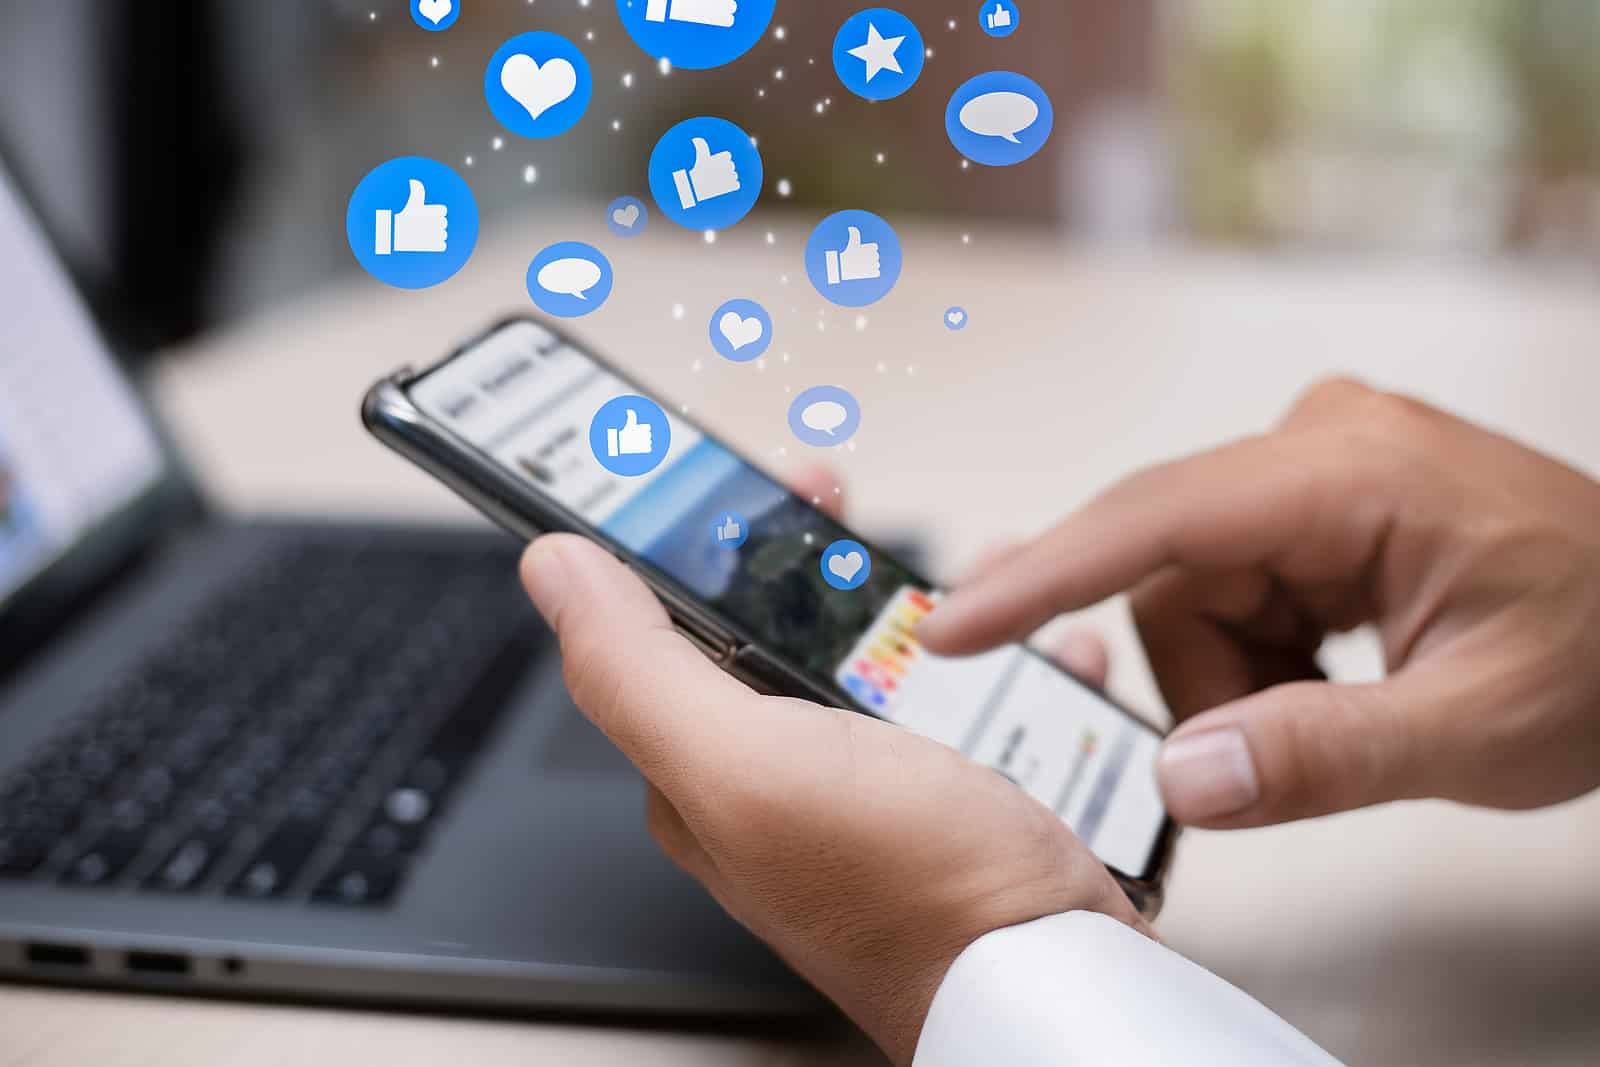 Man person hands holding smartphone for social interaction on social media with notification icons like, heart, comment message and star, digital marketing and social media concept.